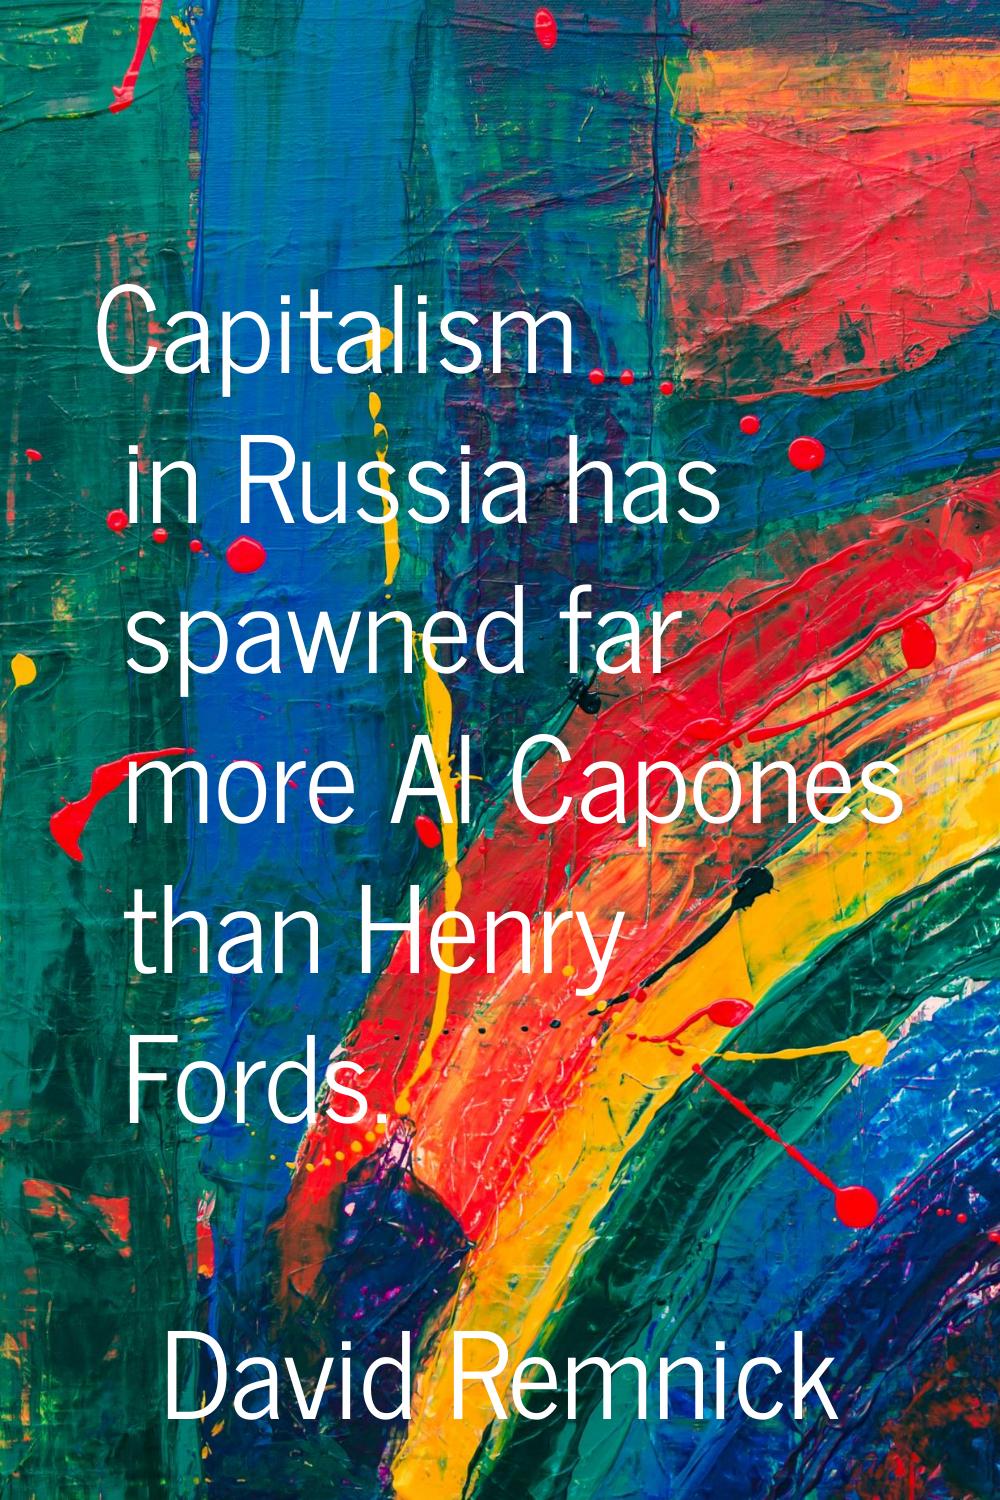 Capitalism in Russia has spawned far more Al Capones than Henry Fords.